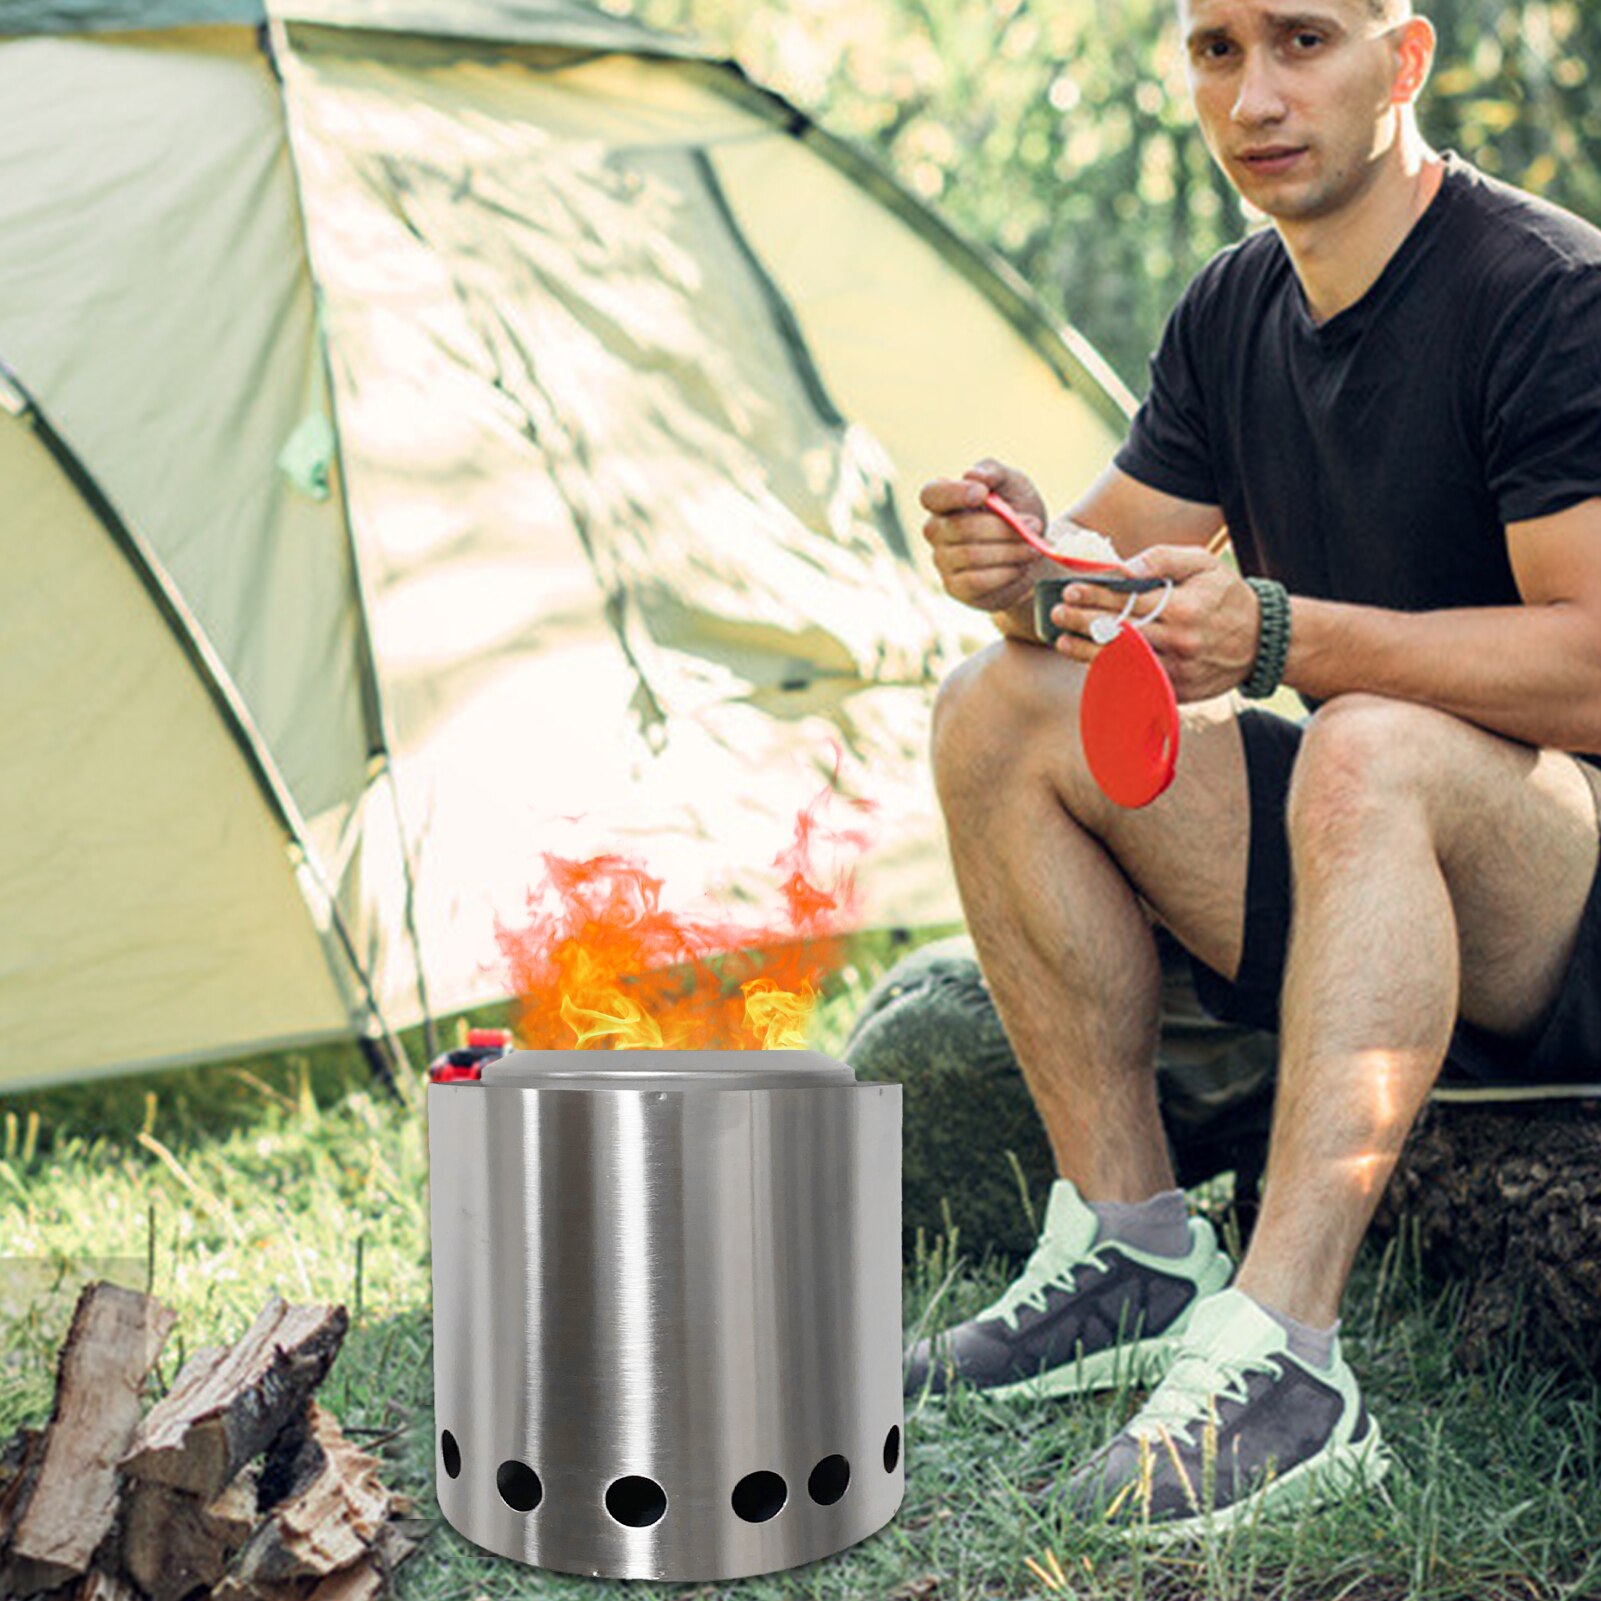 Winter Stainless Steel Folding Warming Furnace Portable Practical Outdoor Fire Pit For Indoor Camping Charcoal Burning 43a